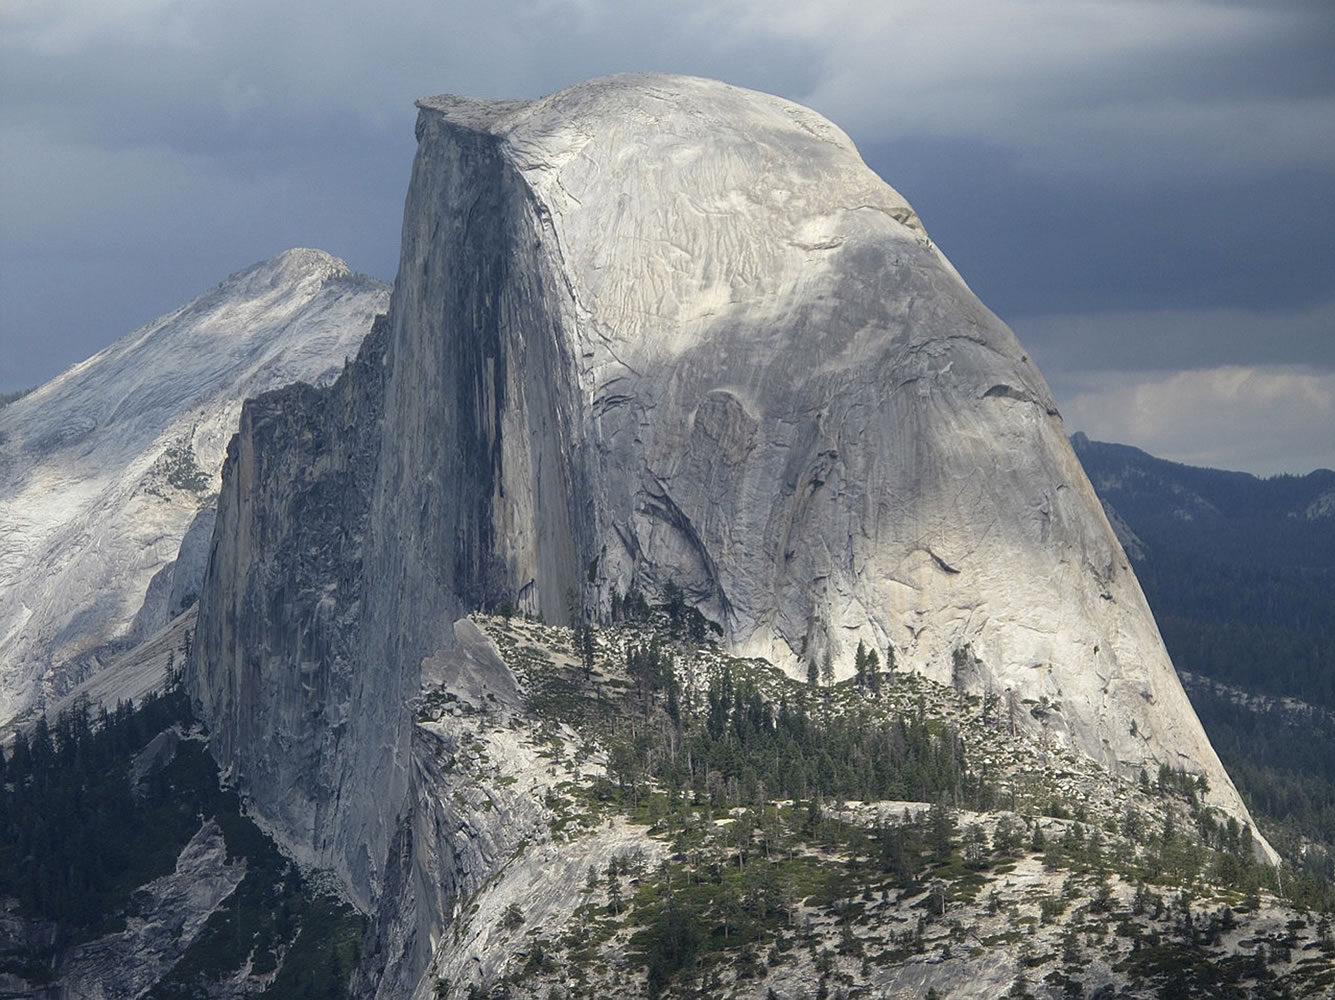 Associated Press files
This August 2011 photo shows a view of Half Dome and Yosemite Valley from Glacier Point at Yosemite National Park, Calif.  A massive sheet of rock has fallen from the vertical face of Half Dome, park officials said Tuesday.